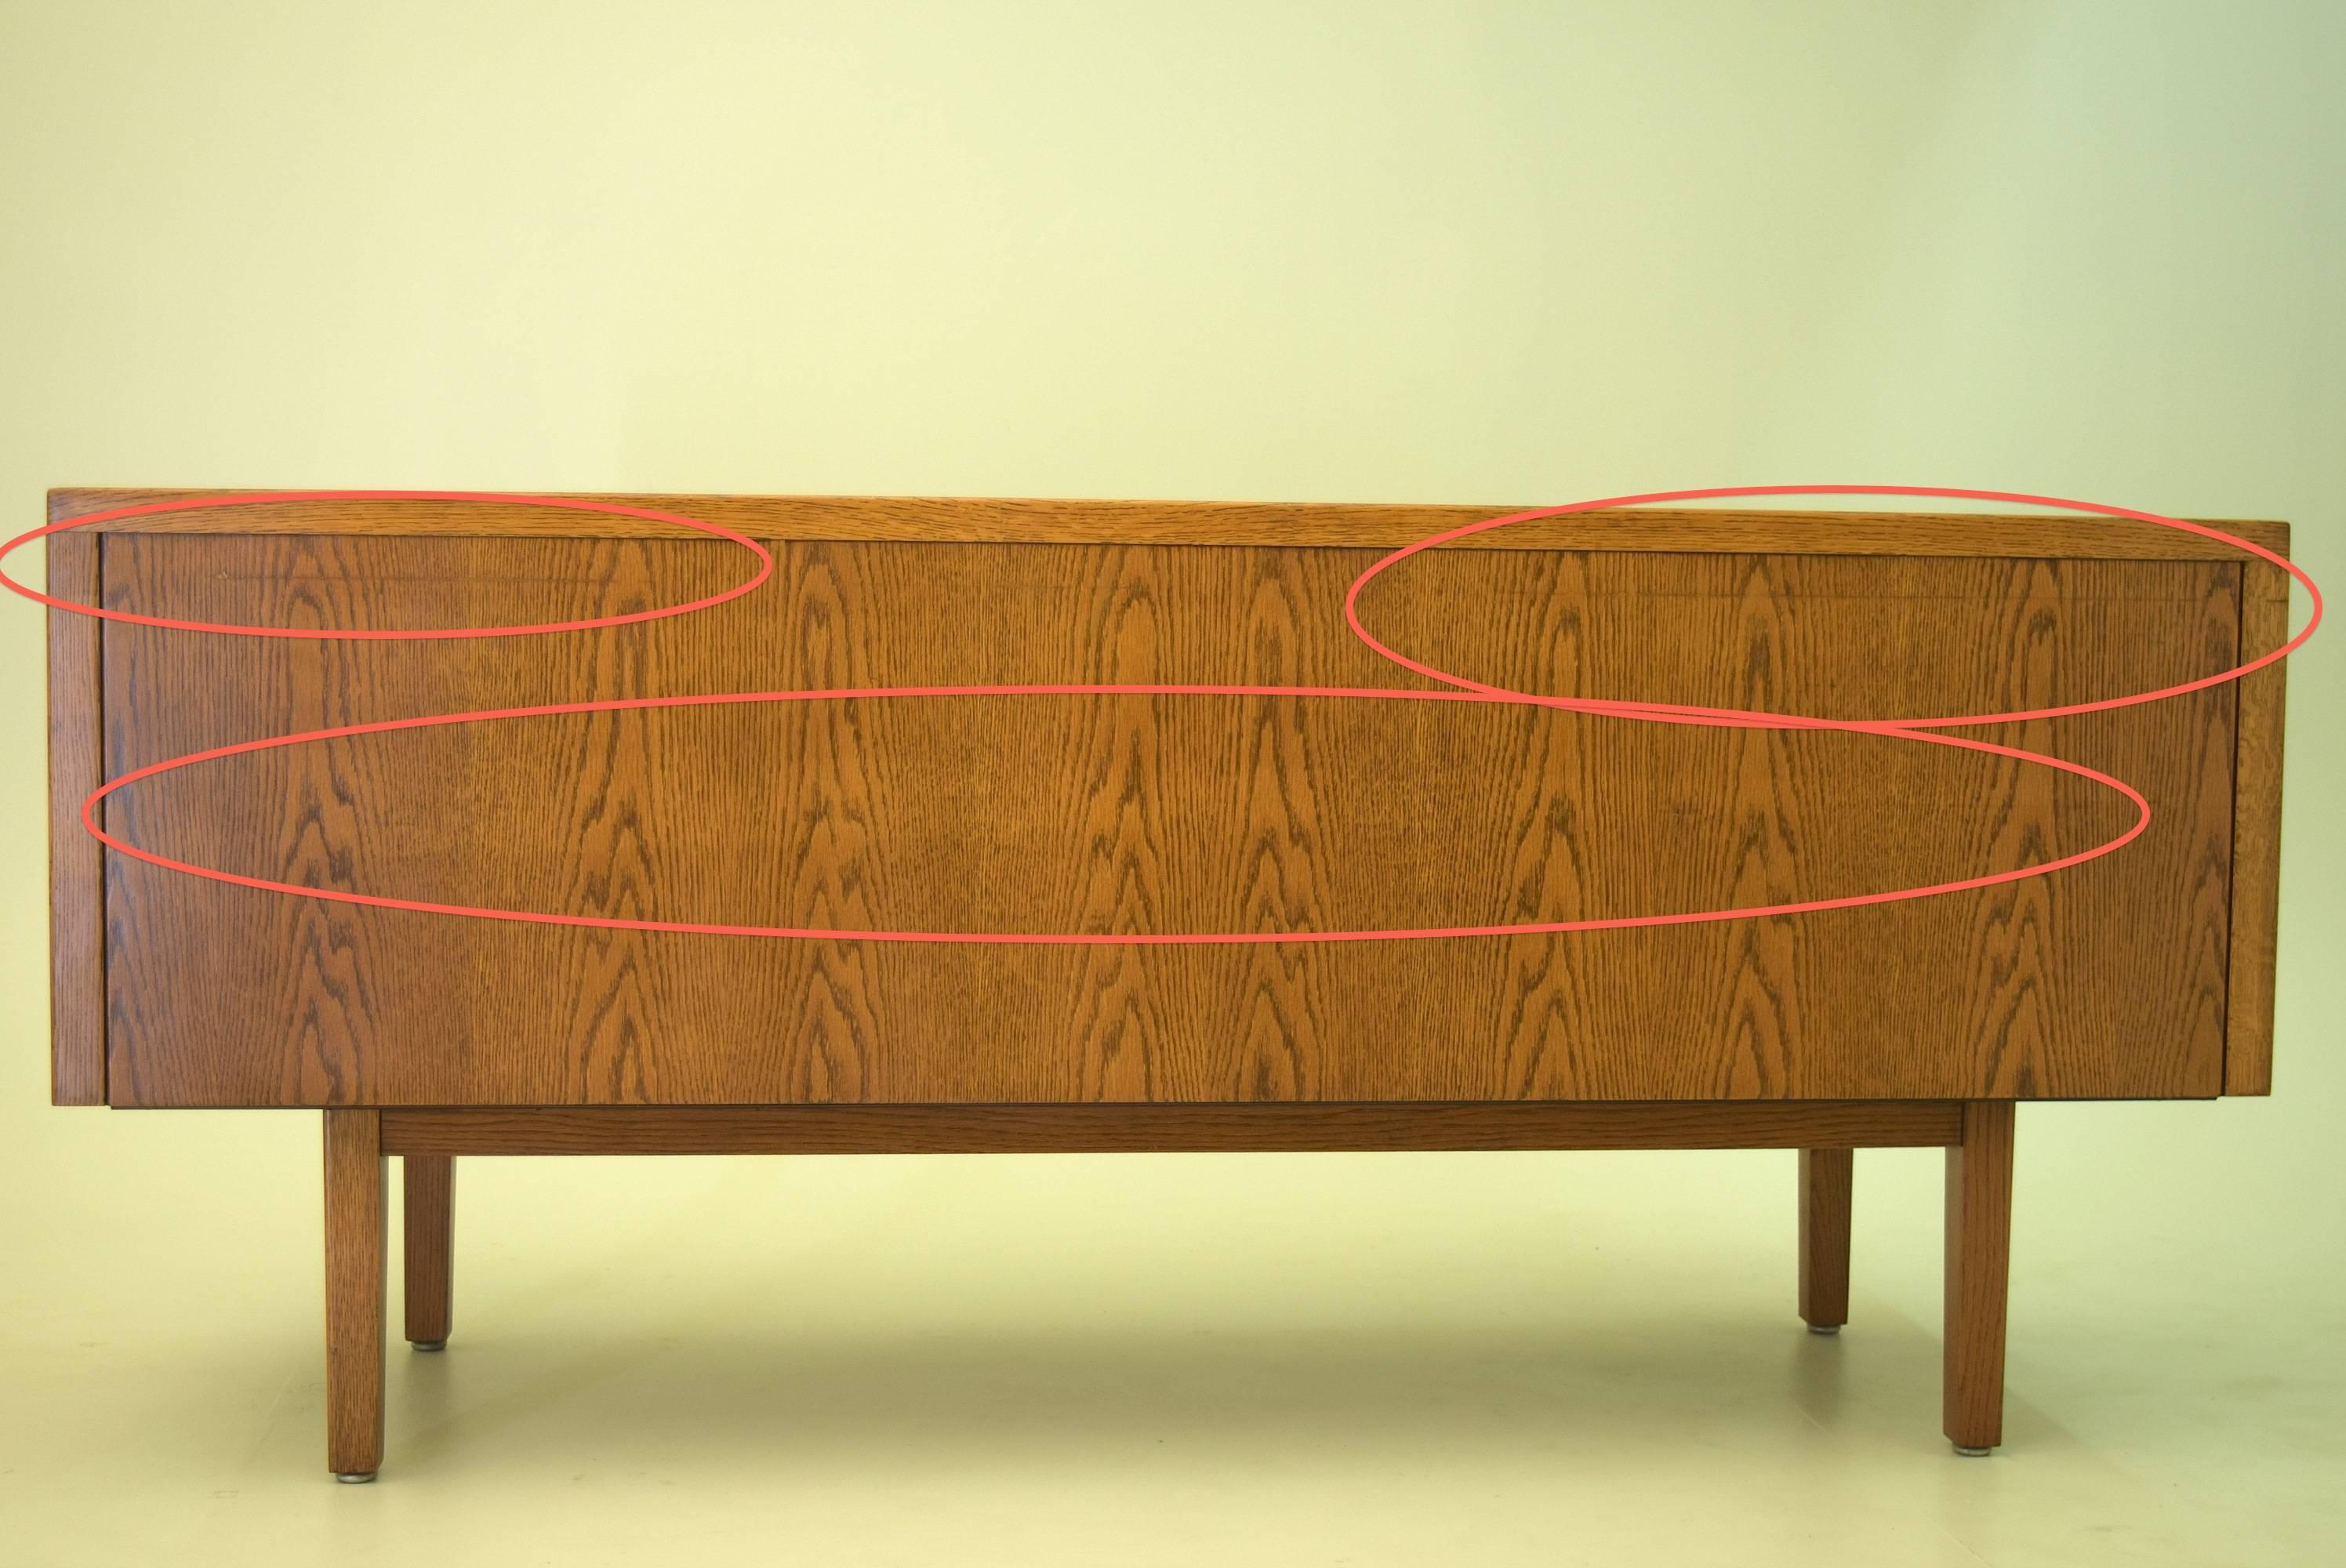 20th Century Reserved: Domore Desk by Davis Allen for Domore in Red Oak